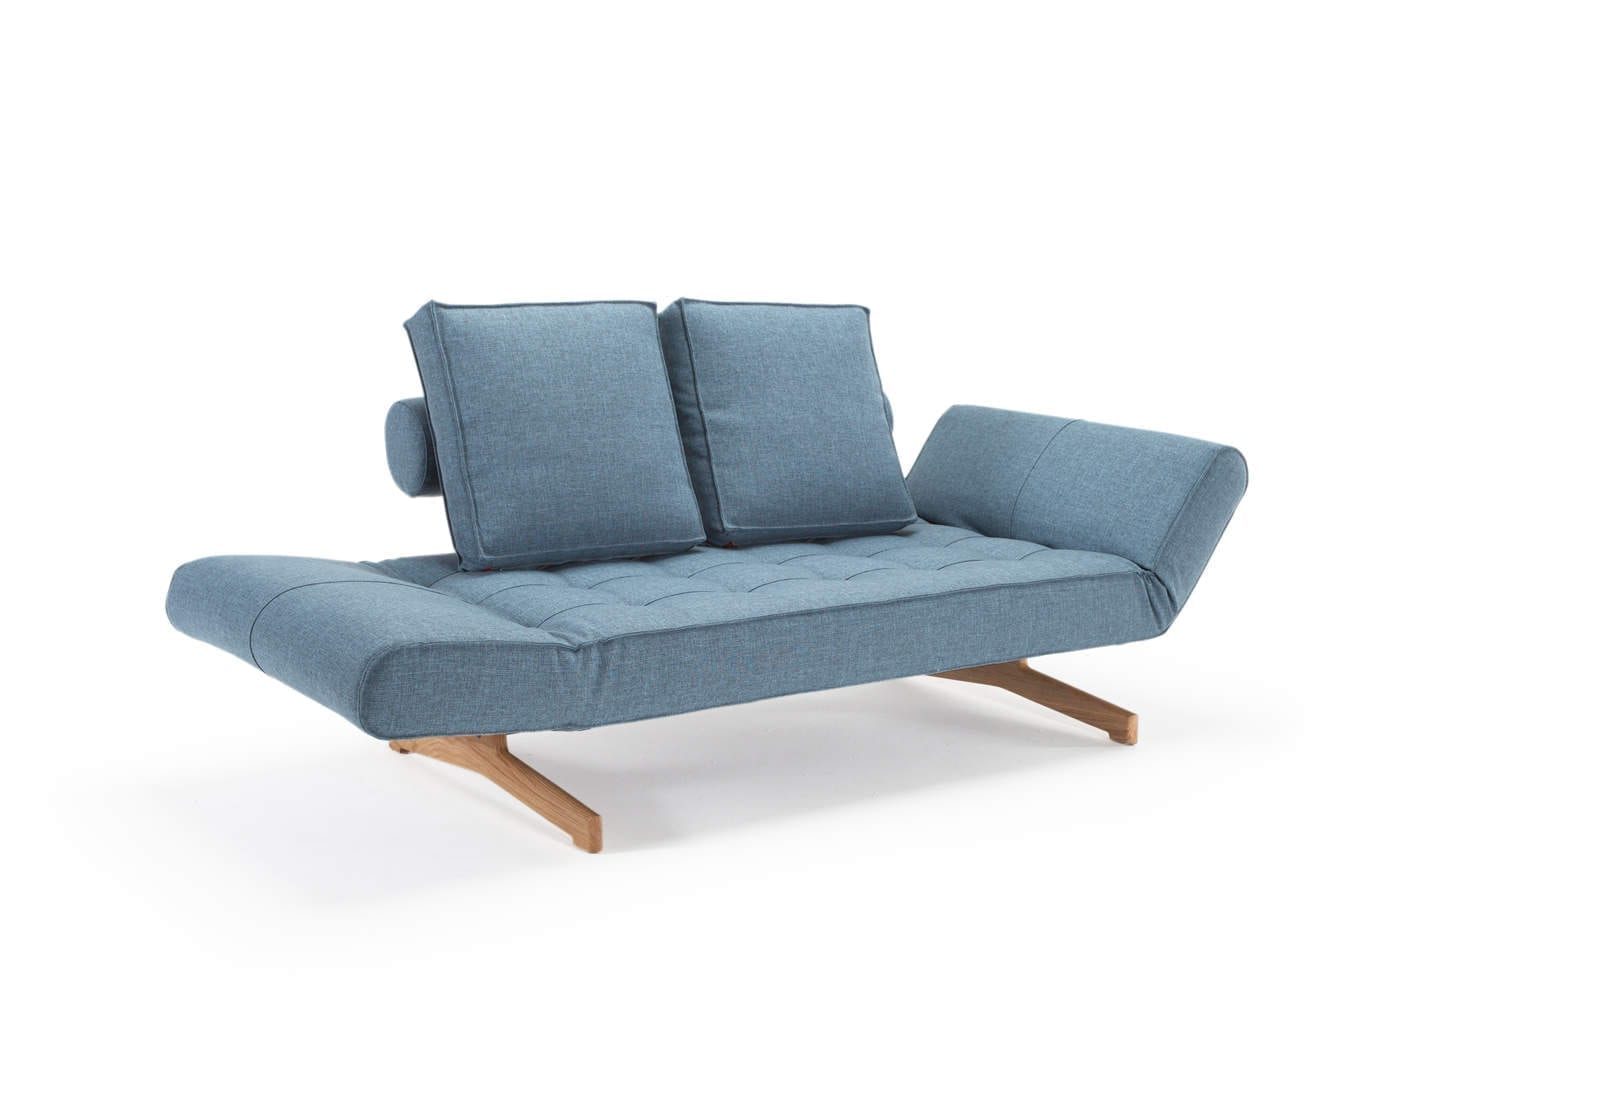 innoation-ghia-wood-sofabed-kanapeagy-daybed-innoconcept-design (14)